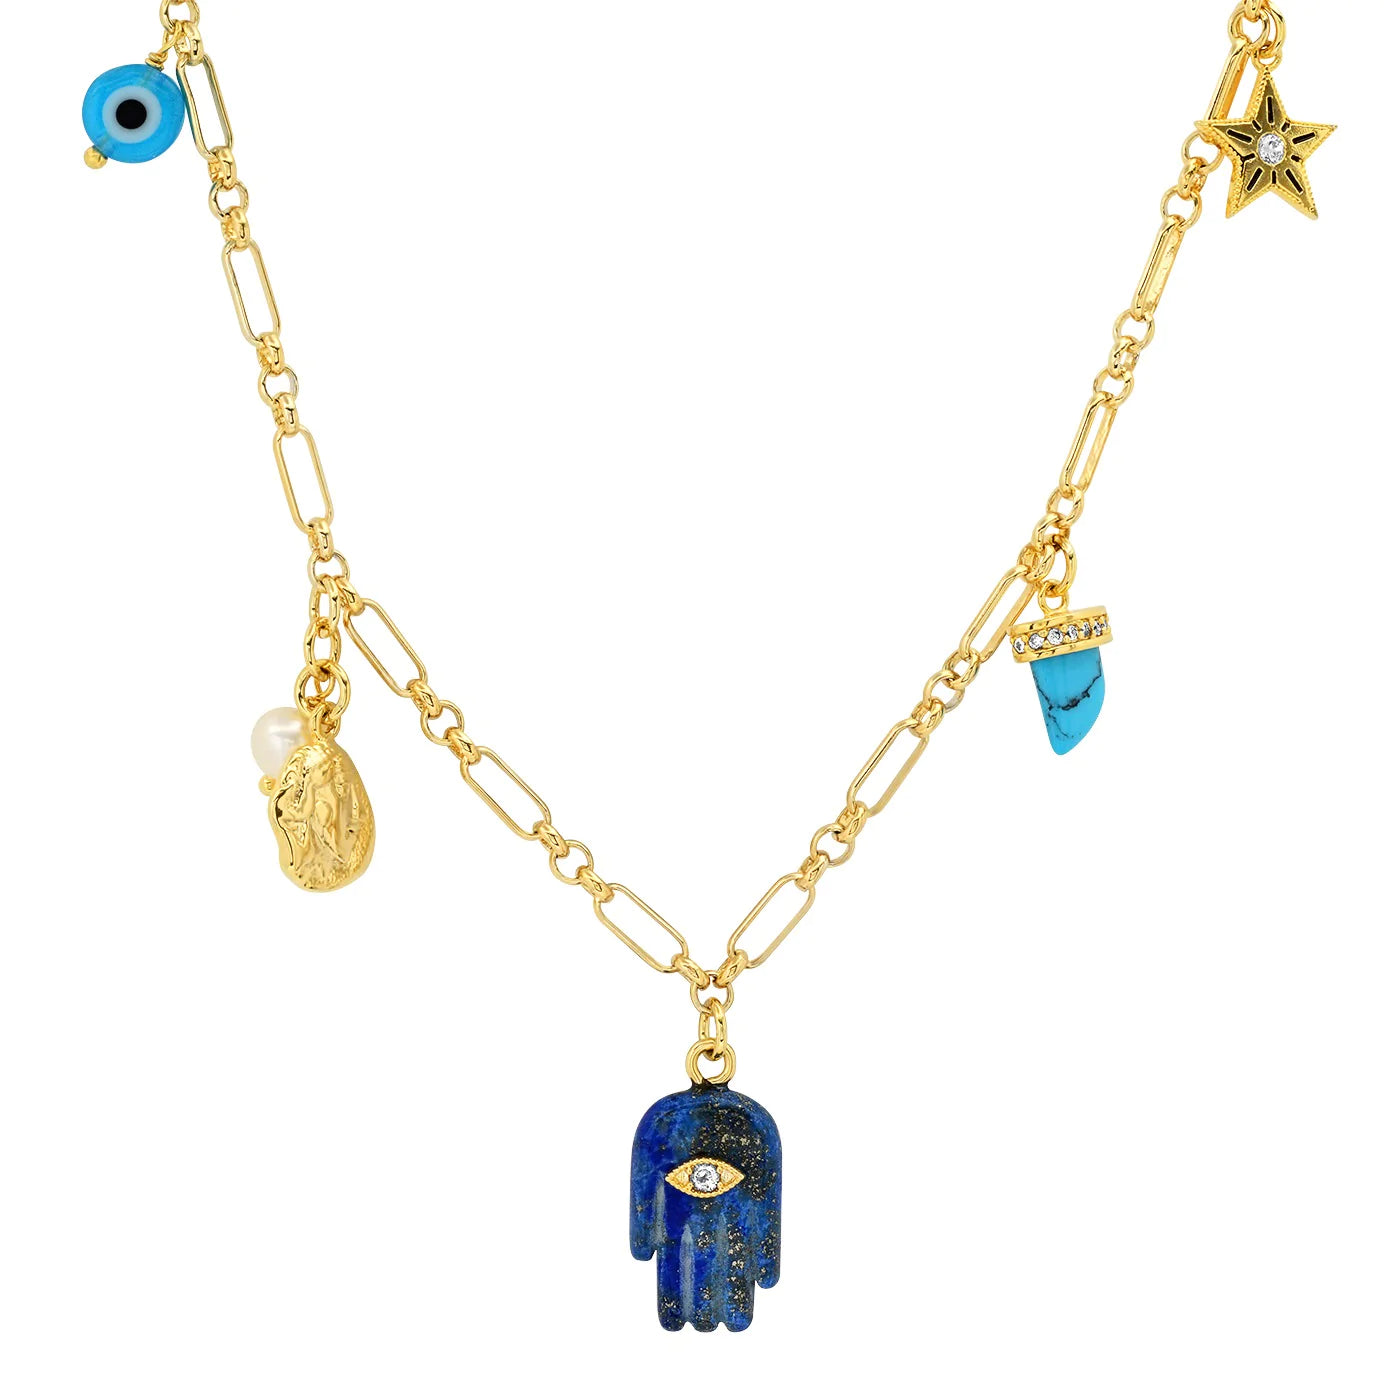 LUCKY STAR CHARM NECKLACE